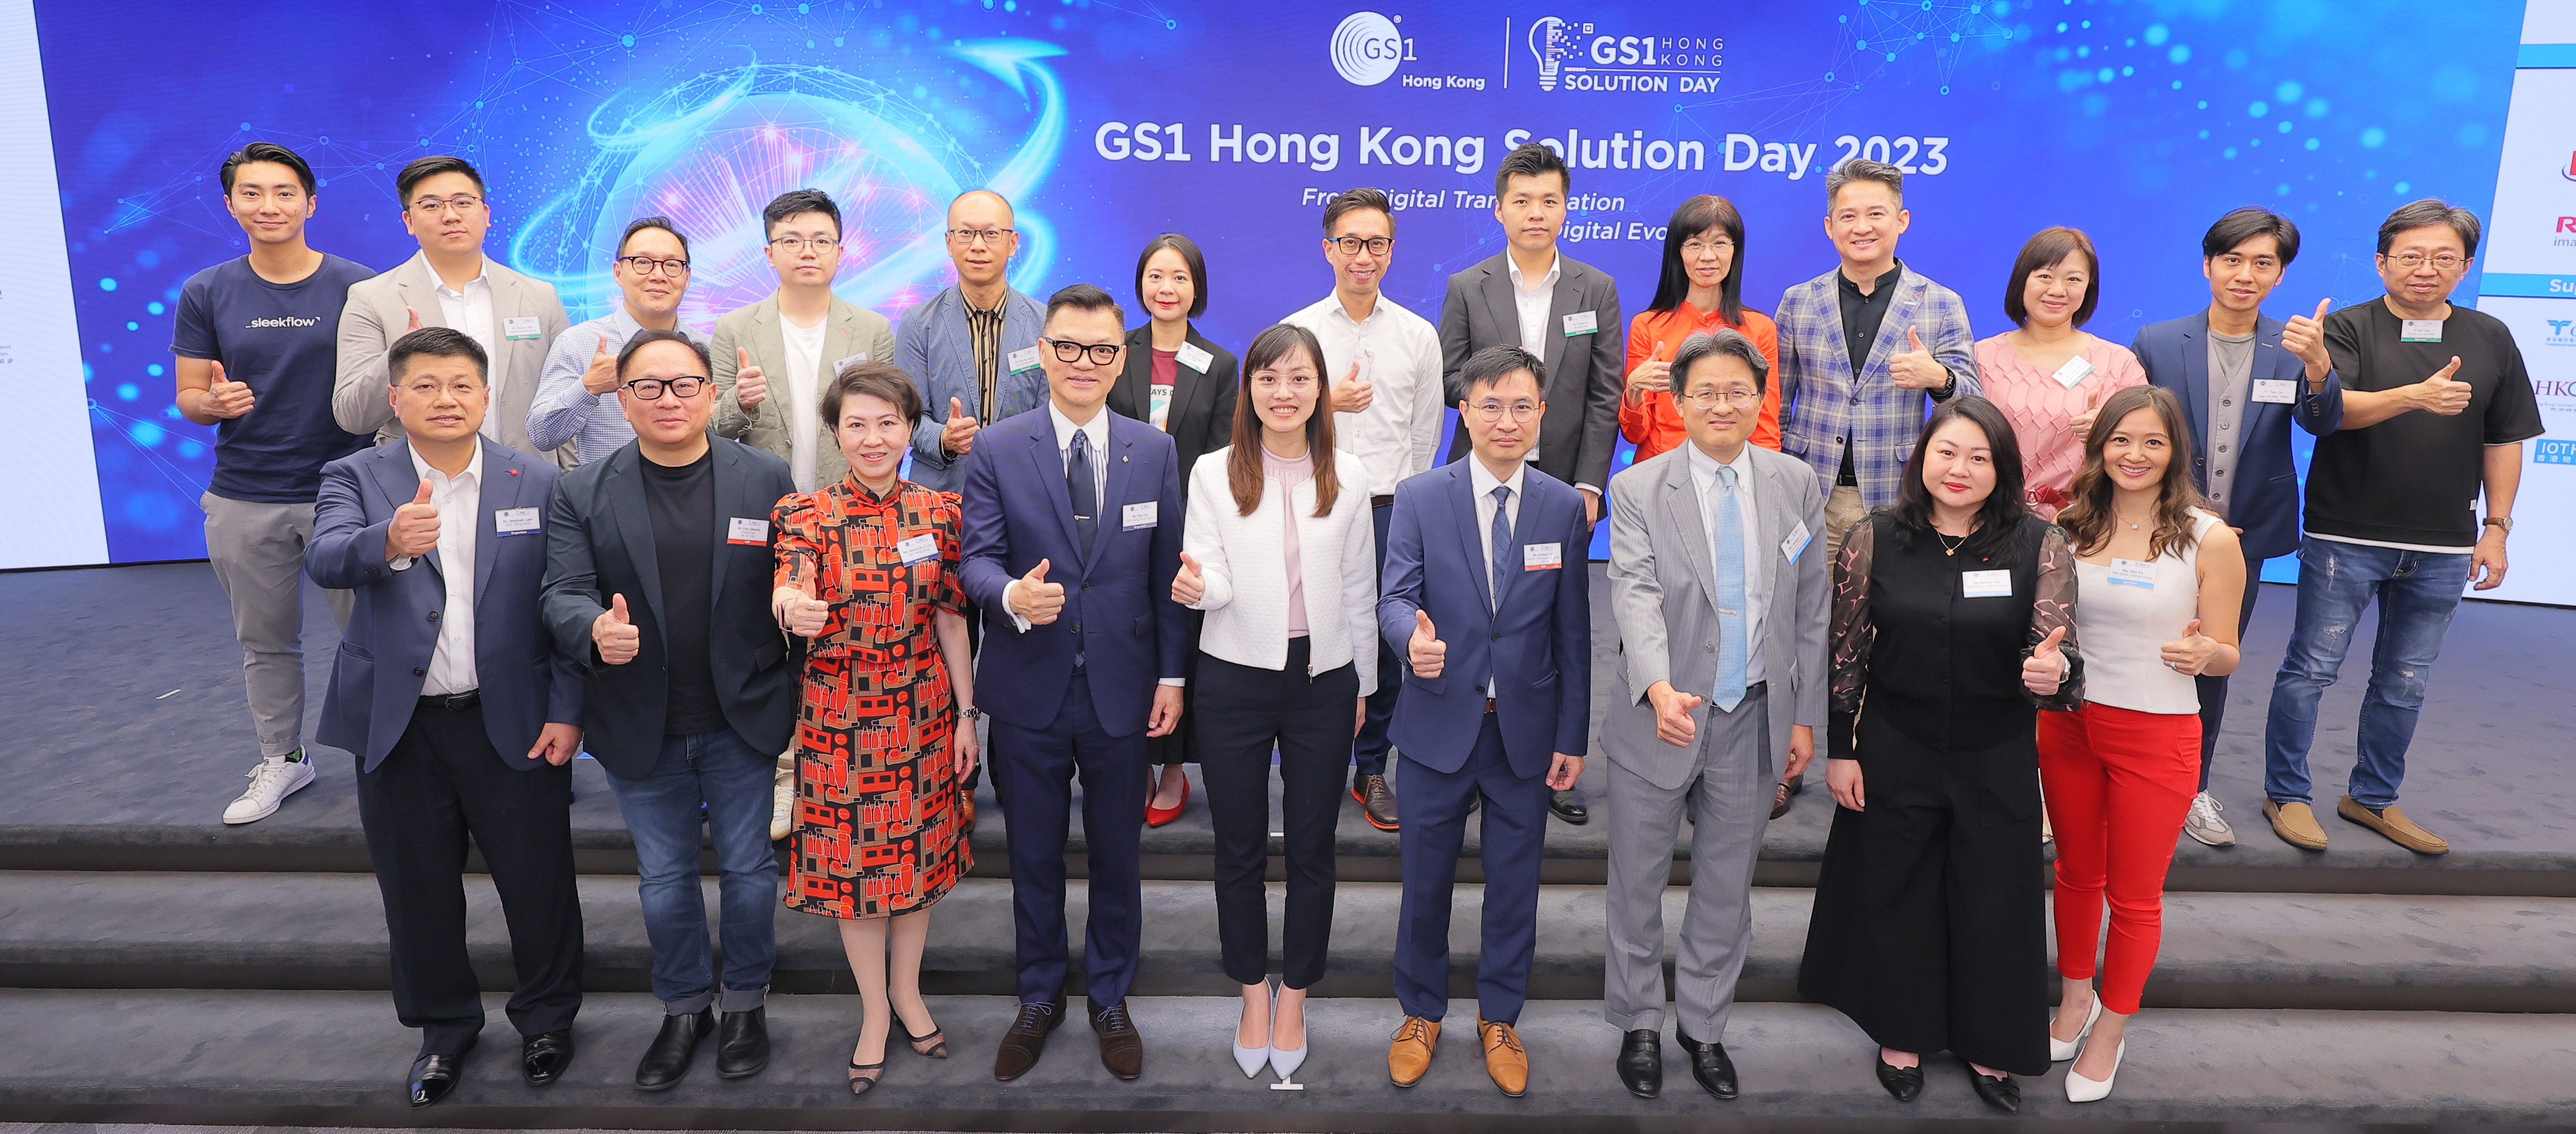 GS1 HK Solution Day 2023